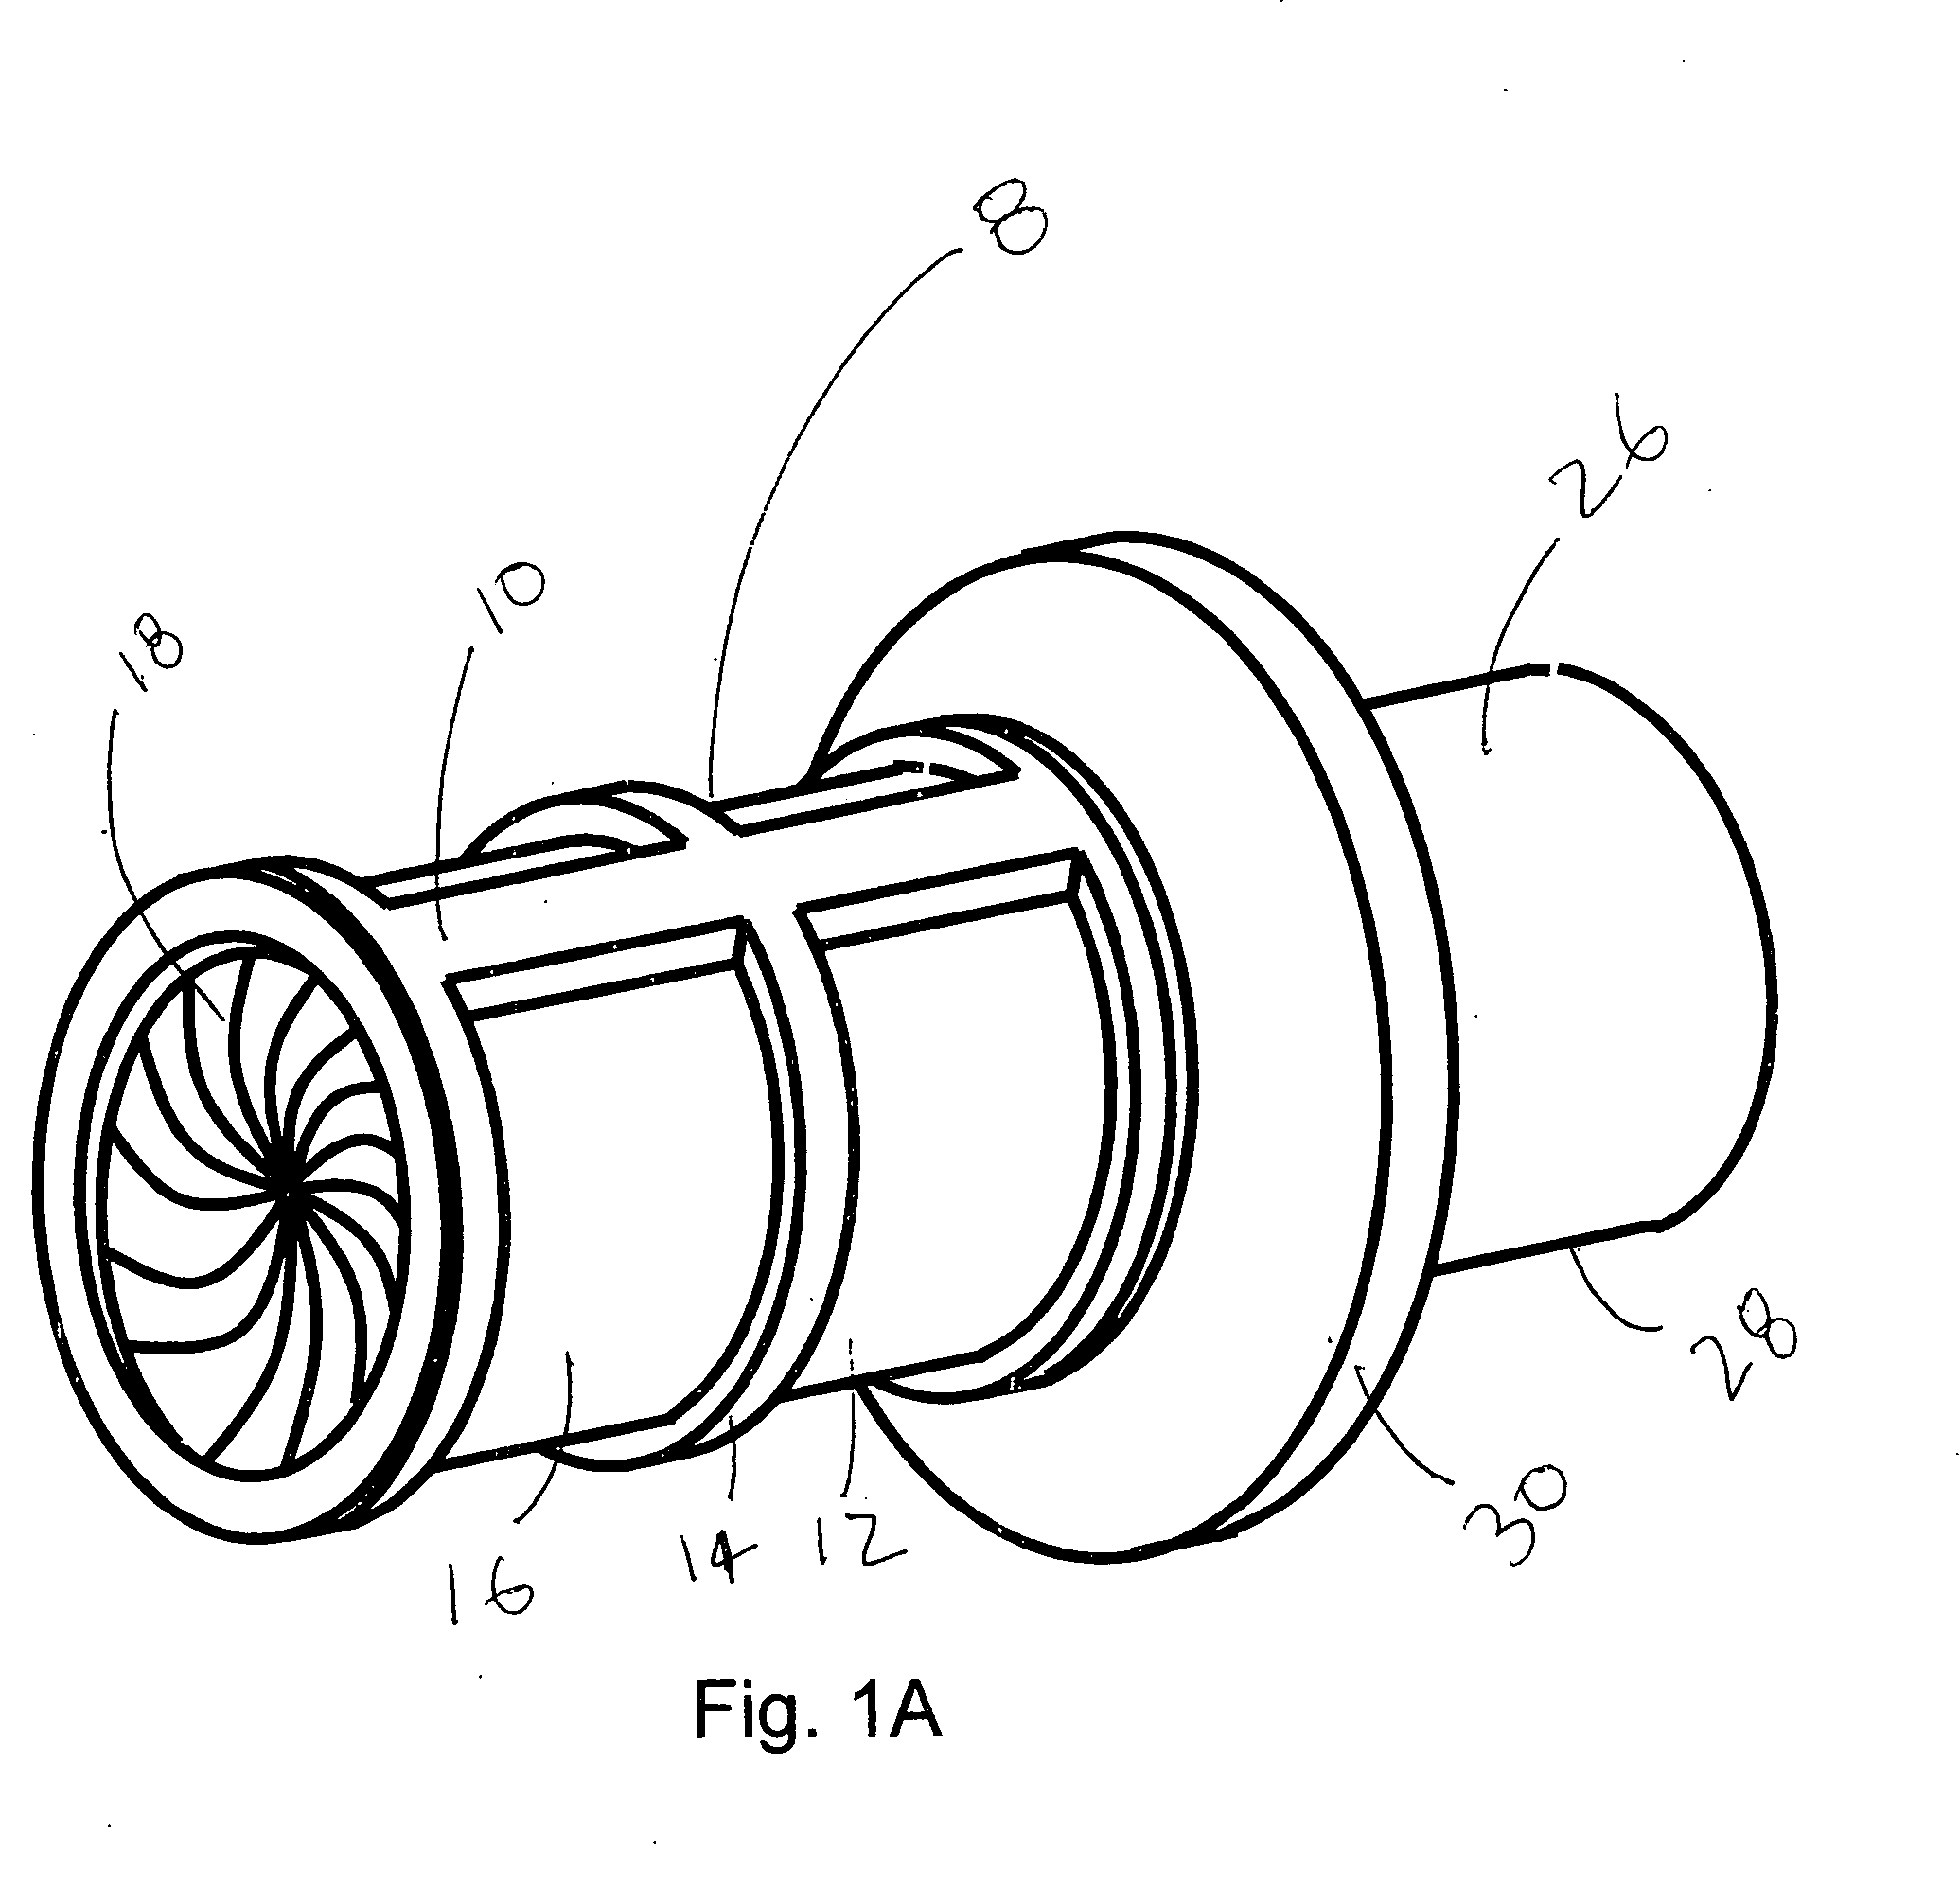 Anatomical cavity implant transport device and method